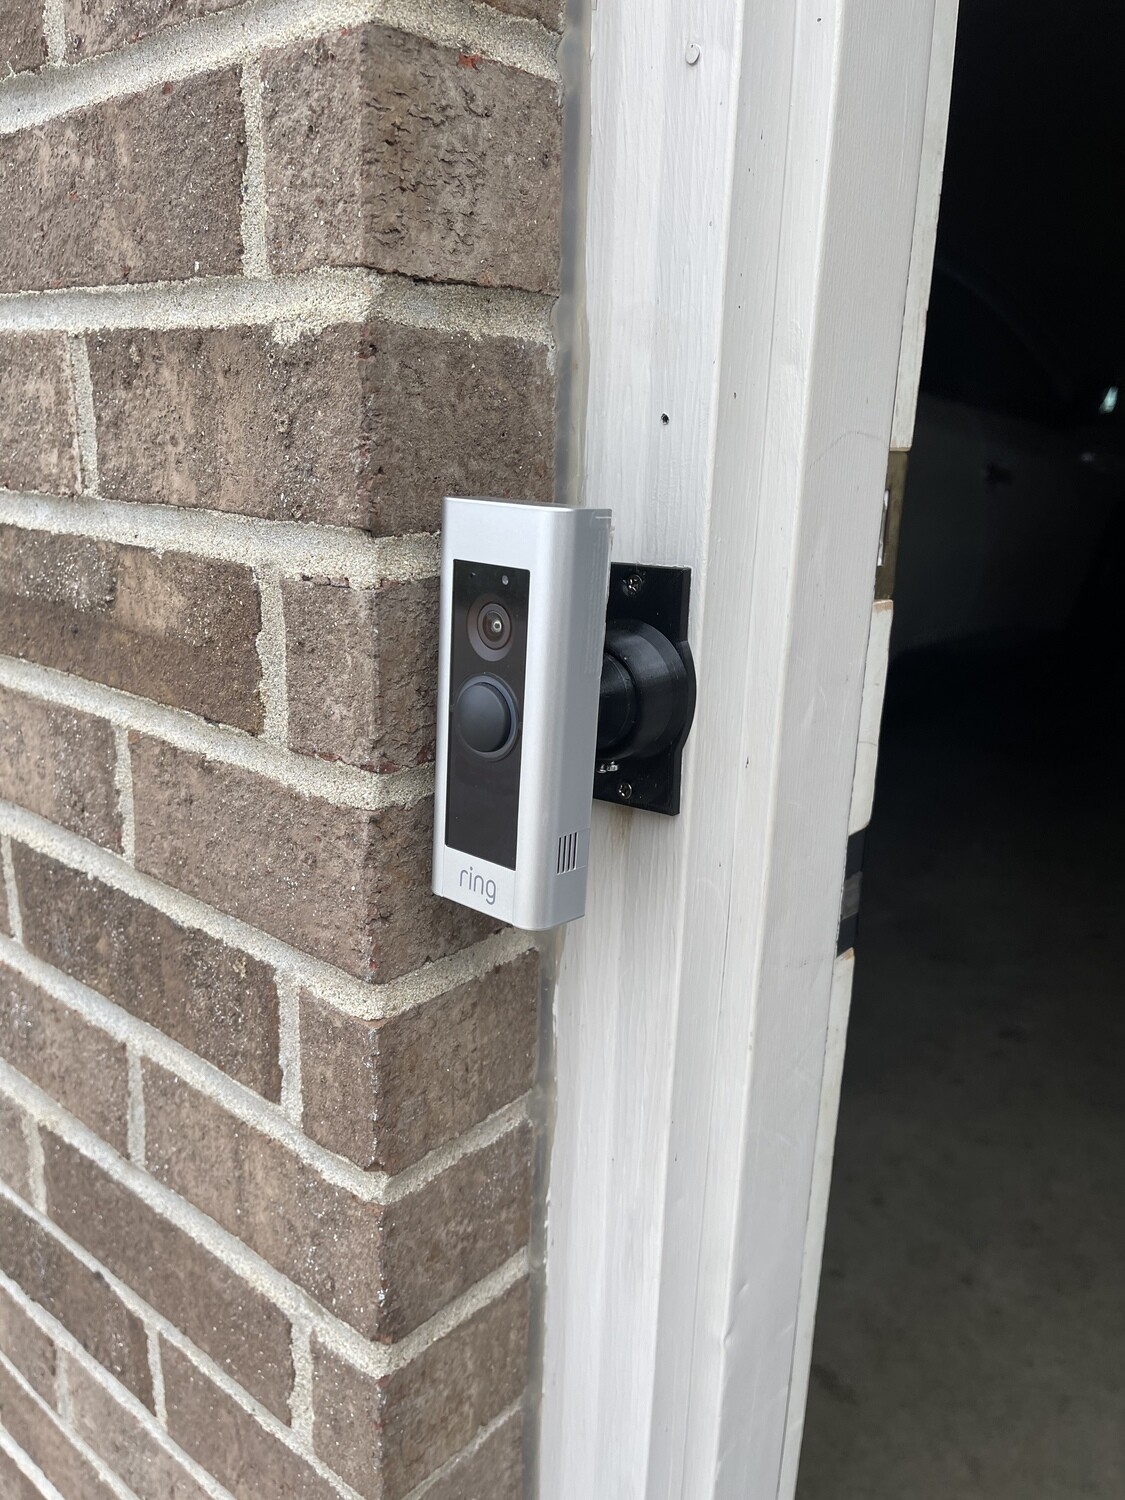 Doorbell Mount Bracket Fully Adjustable 35 Degree Mount Bracket for Straight Installation that need Minor Adjustment to Angle - Ring Wyze Logitech SimpliSafe or any other doorbell